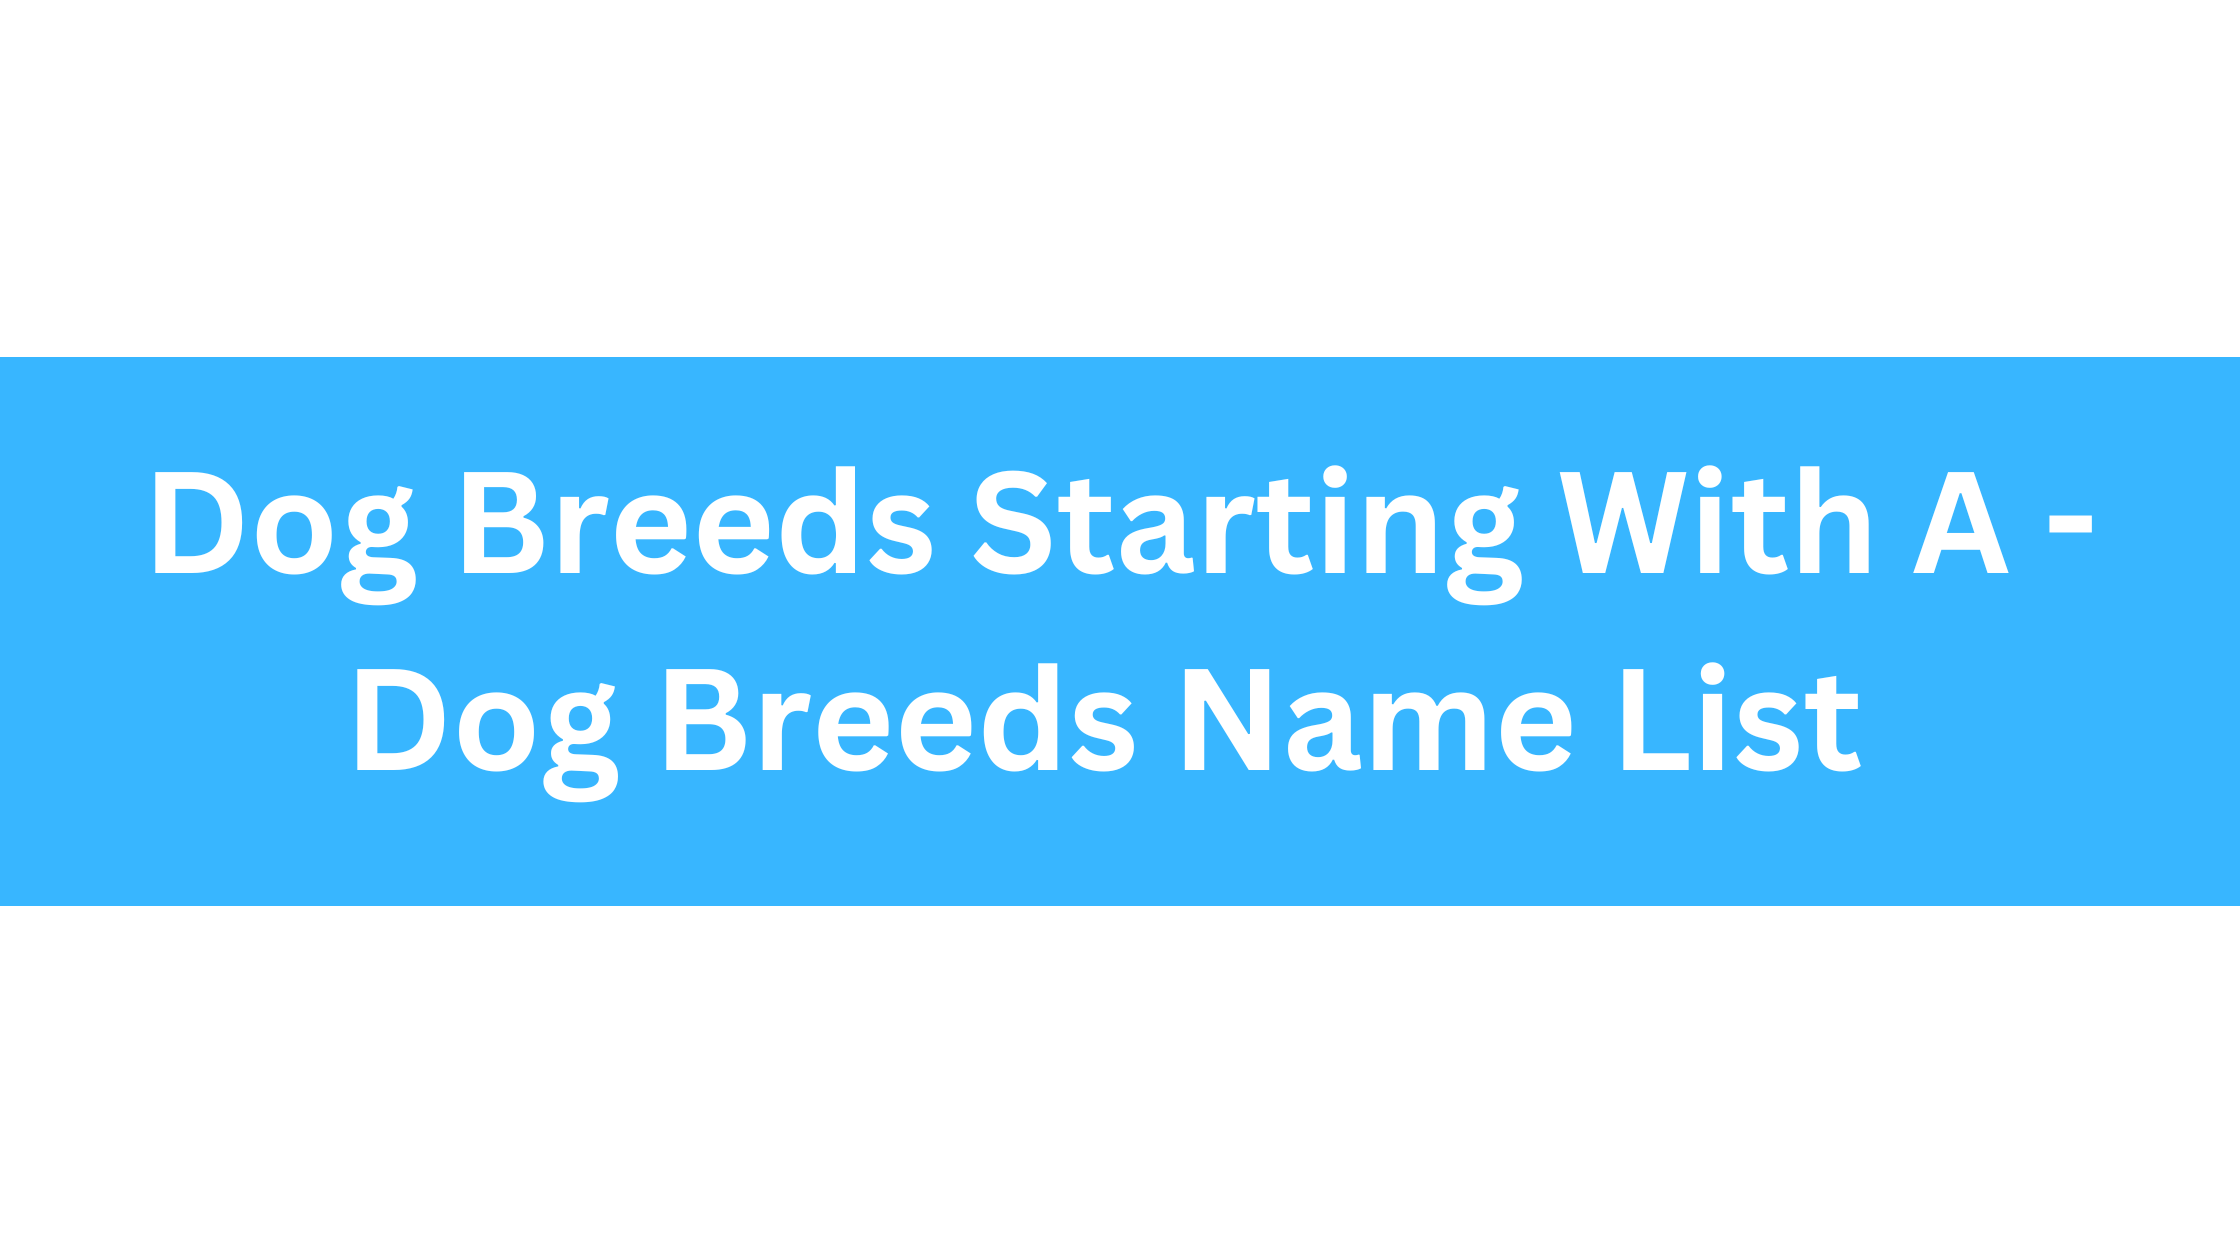 Dog Breeds Starting With A